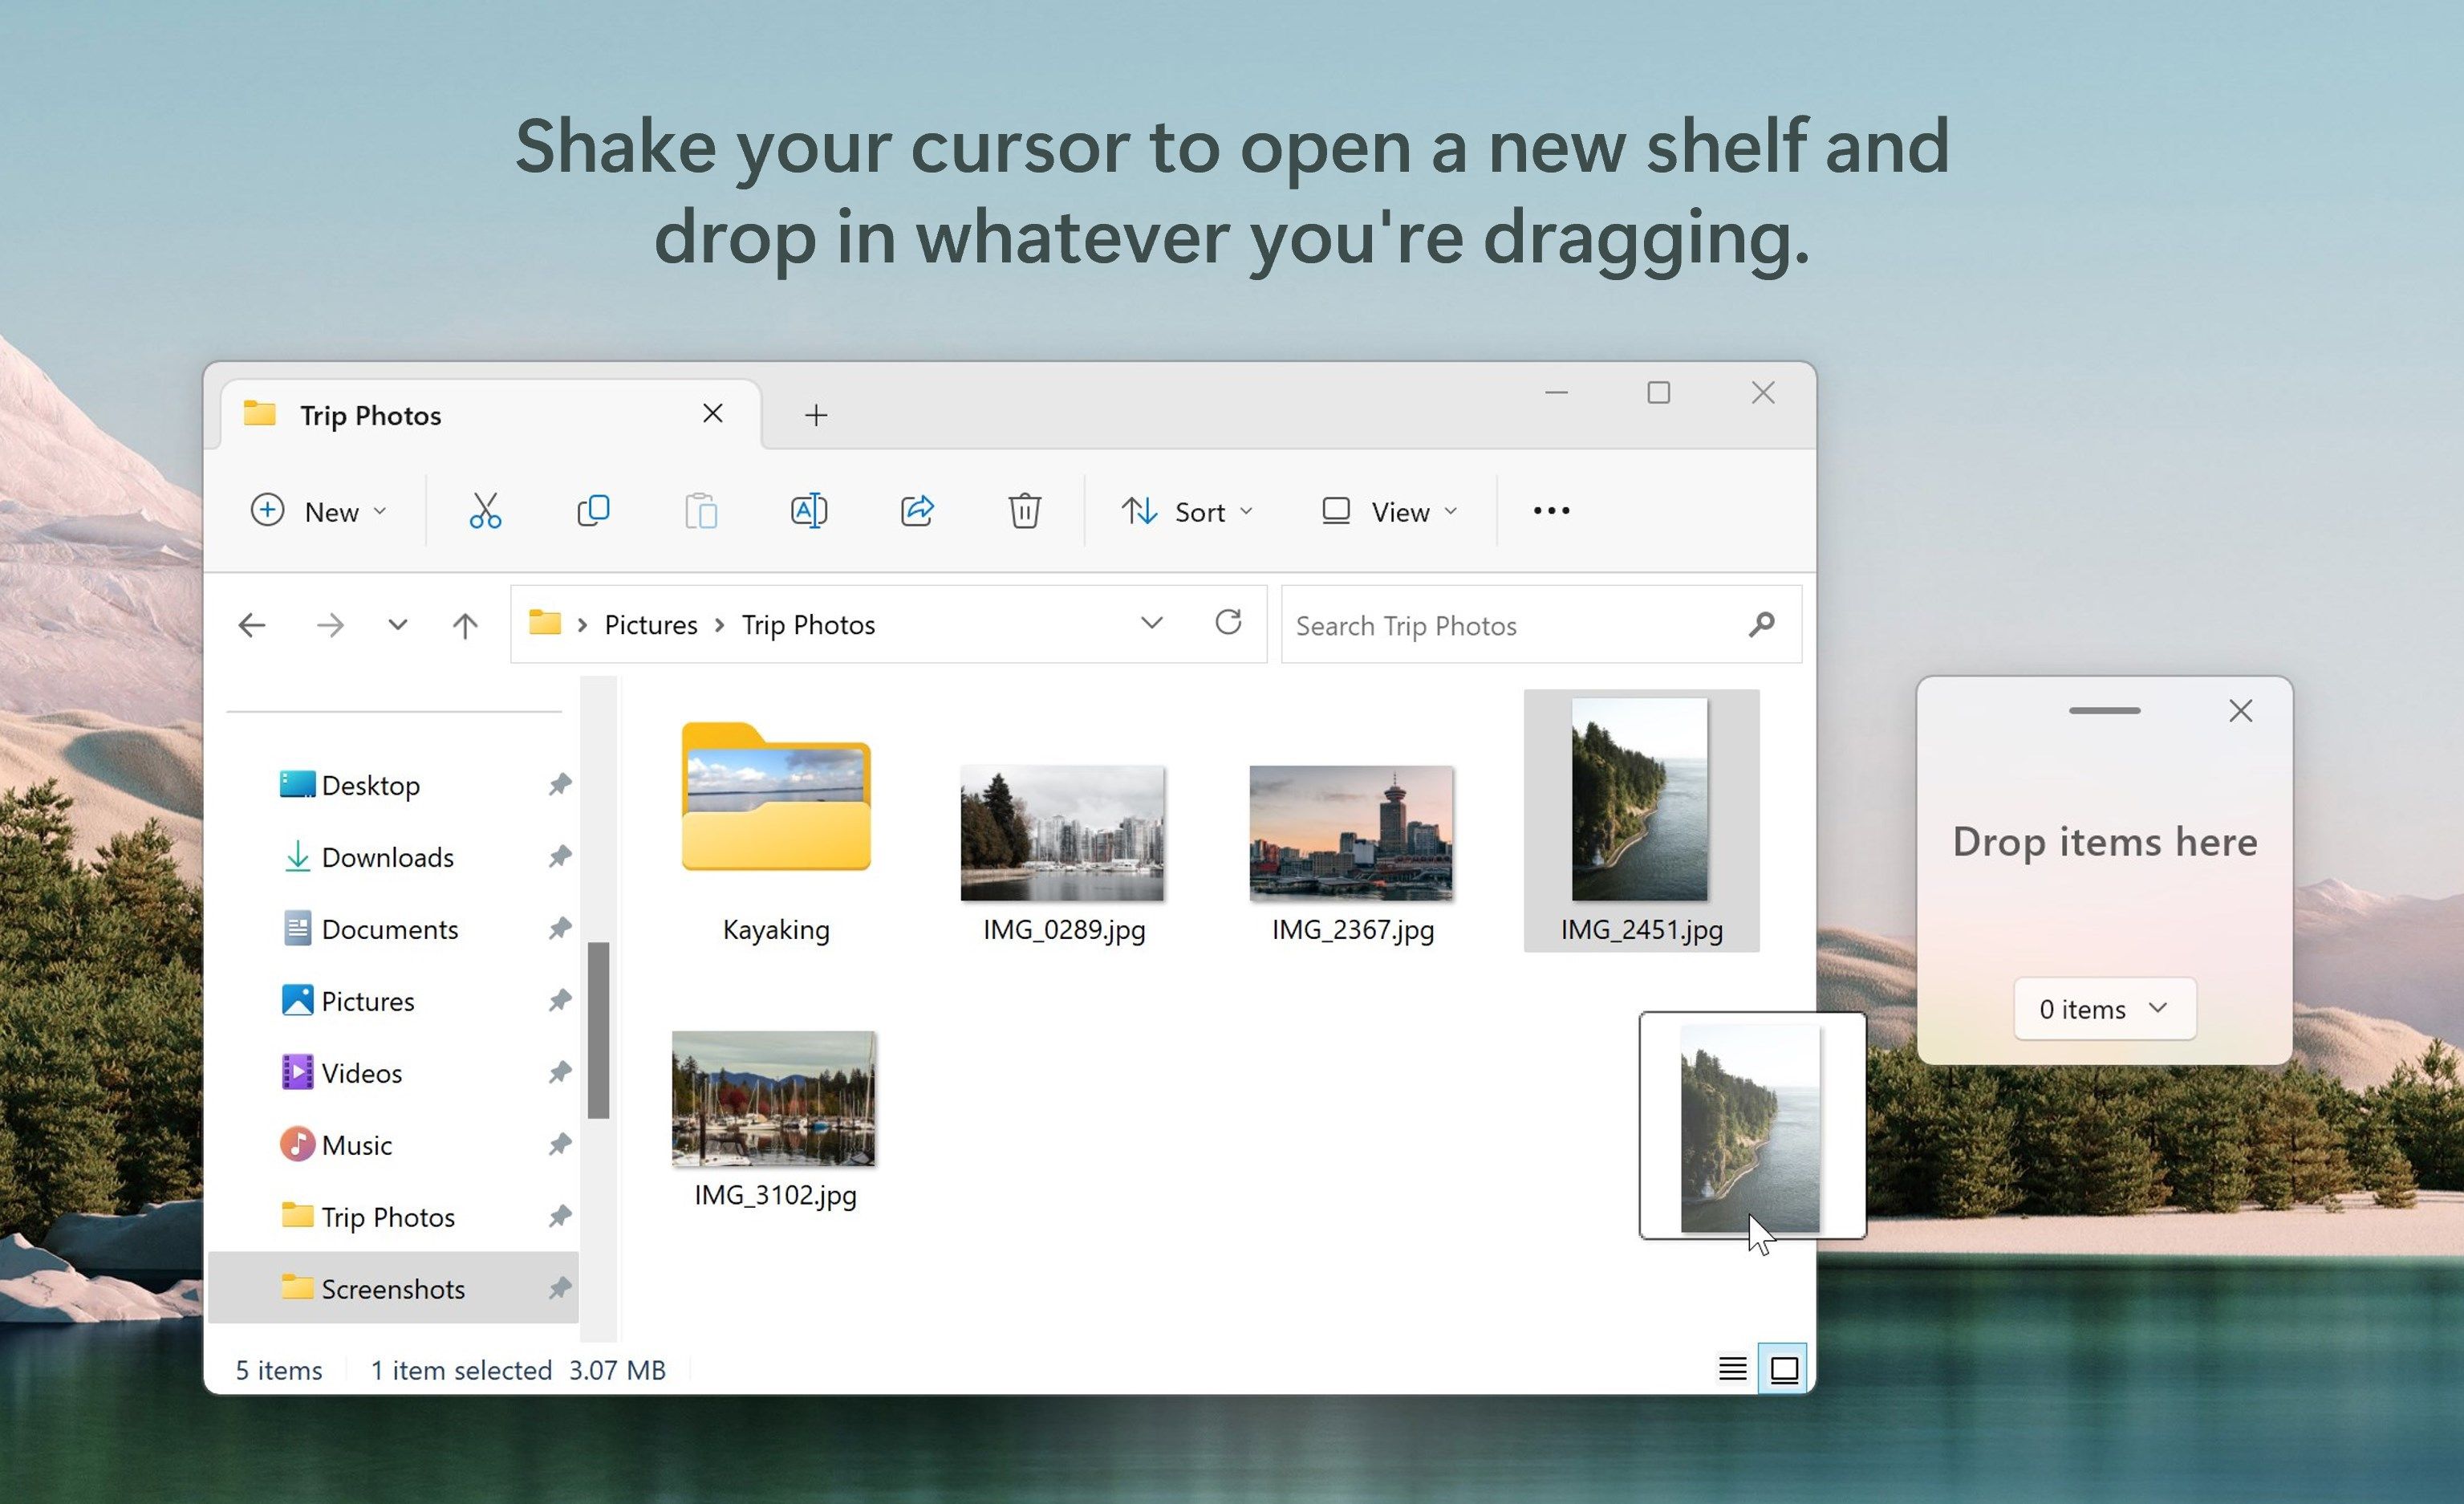 Shake your cursor to open a new shelf and drop in whatever you're dragging.